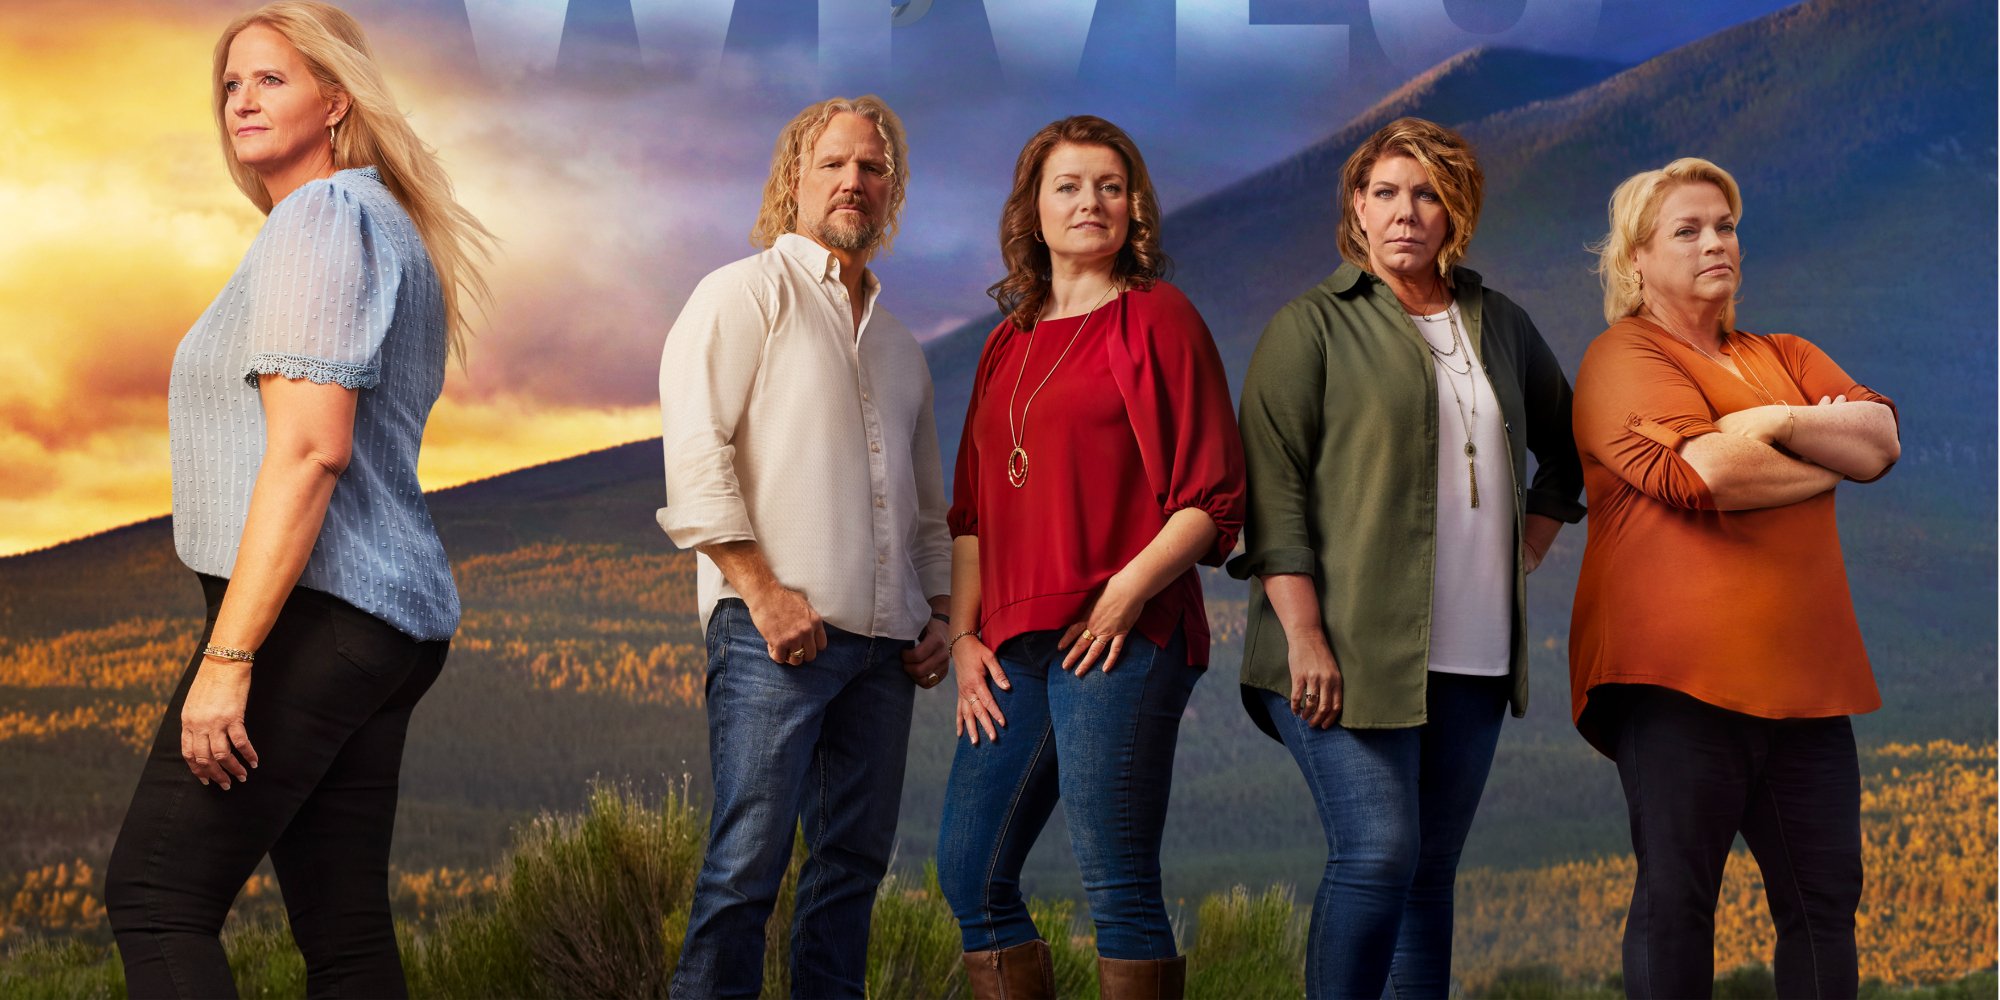 Christine Brown poses with Kody, Robyn, Meri, and Janelle Brown in a TLC photograph for season 17 of 'Sister Wives.'